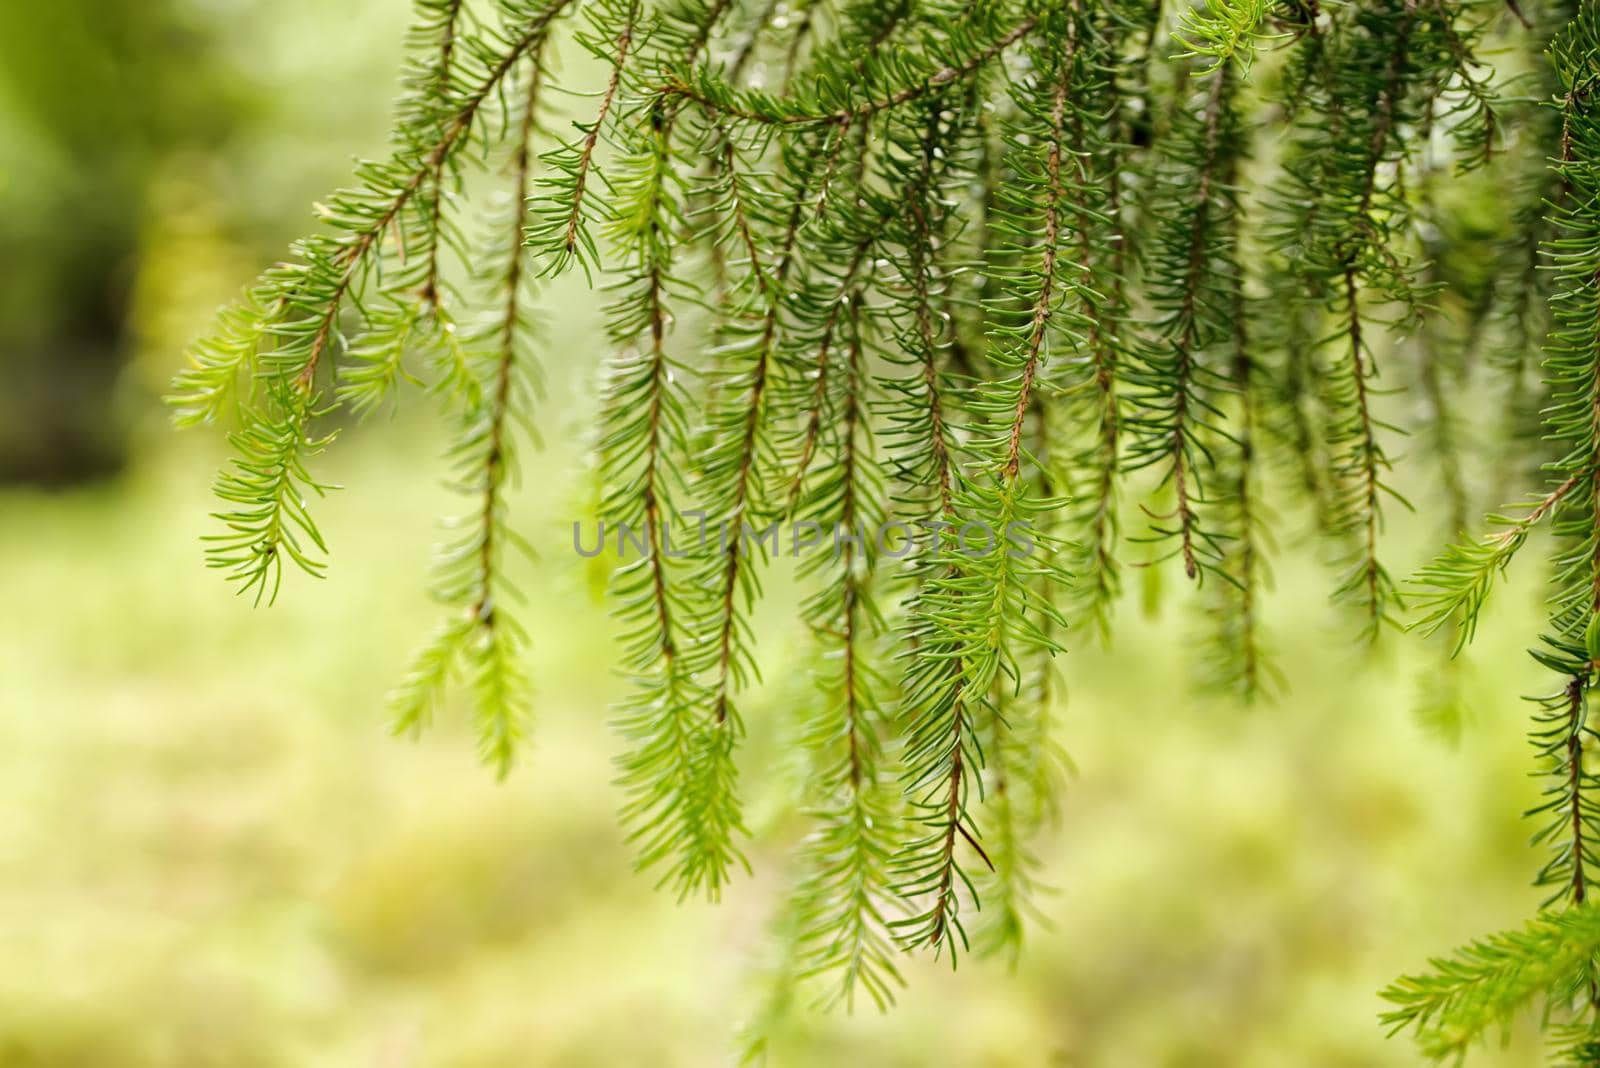 Green branches of an evergreen tree with needles hanging down by Estival